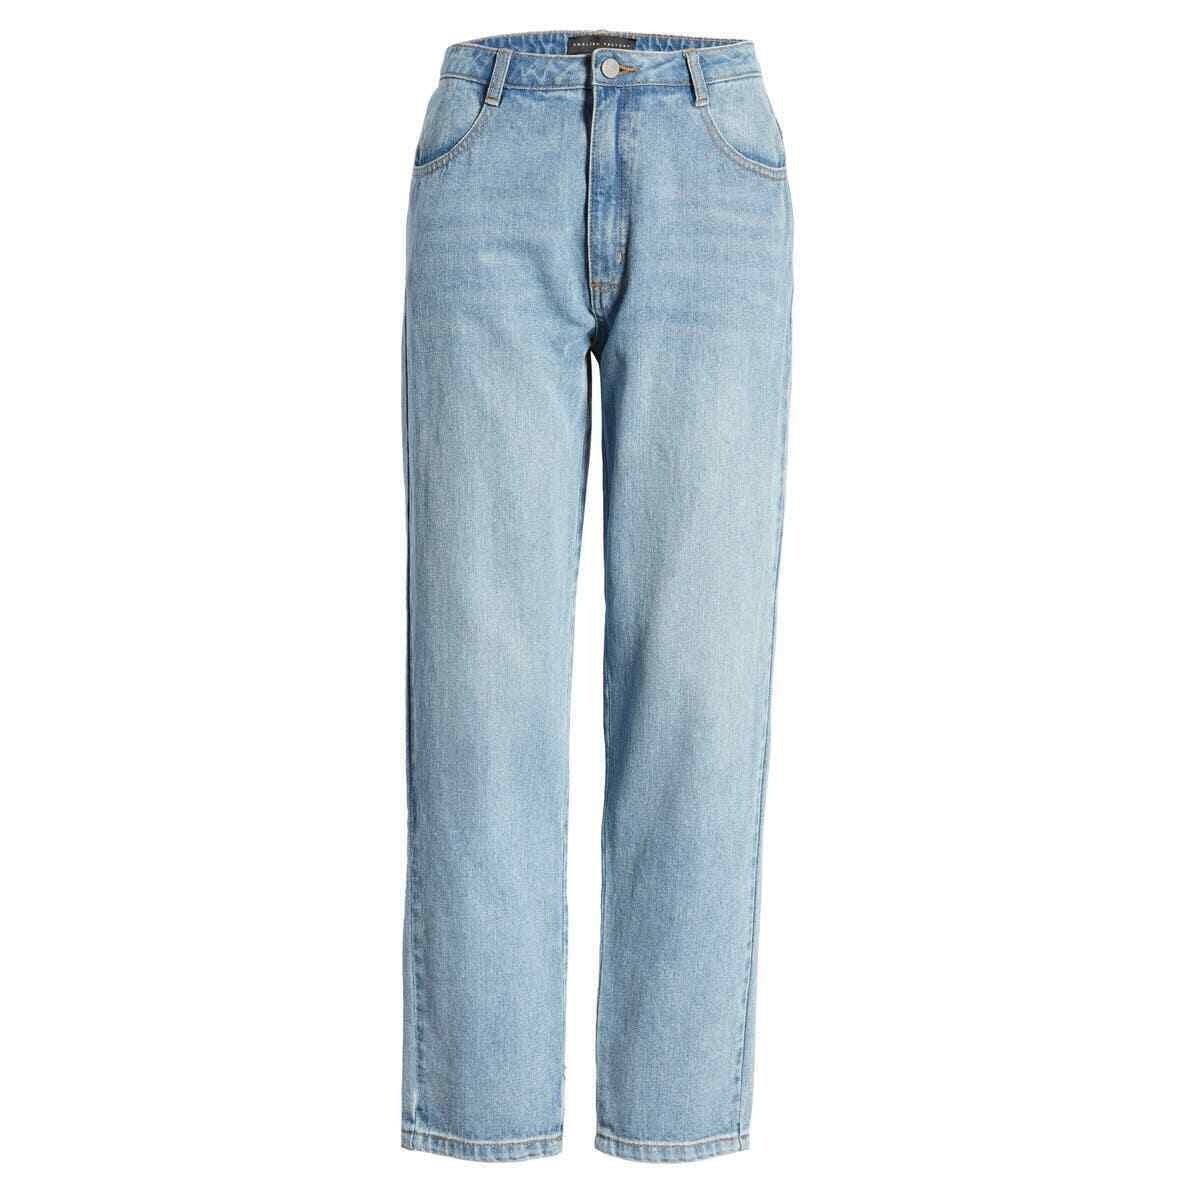 English Factory High Waist Ankle Jeans women size 23 Blue